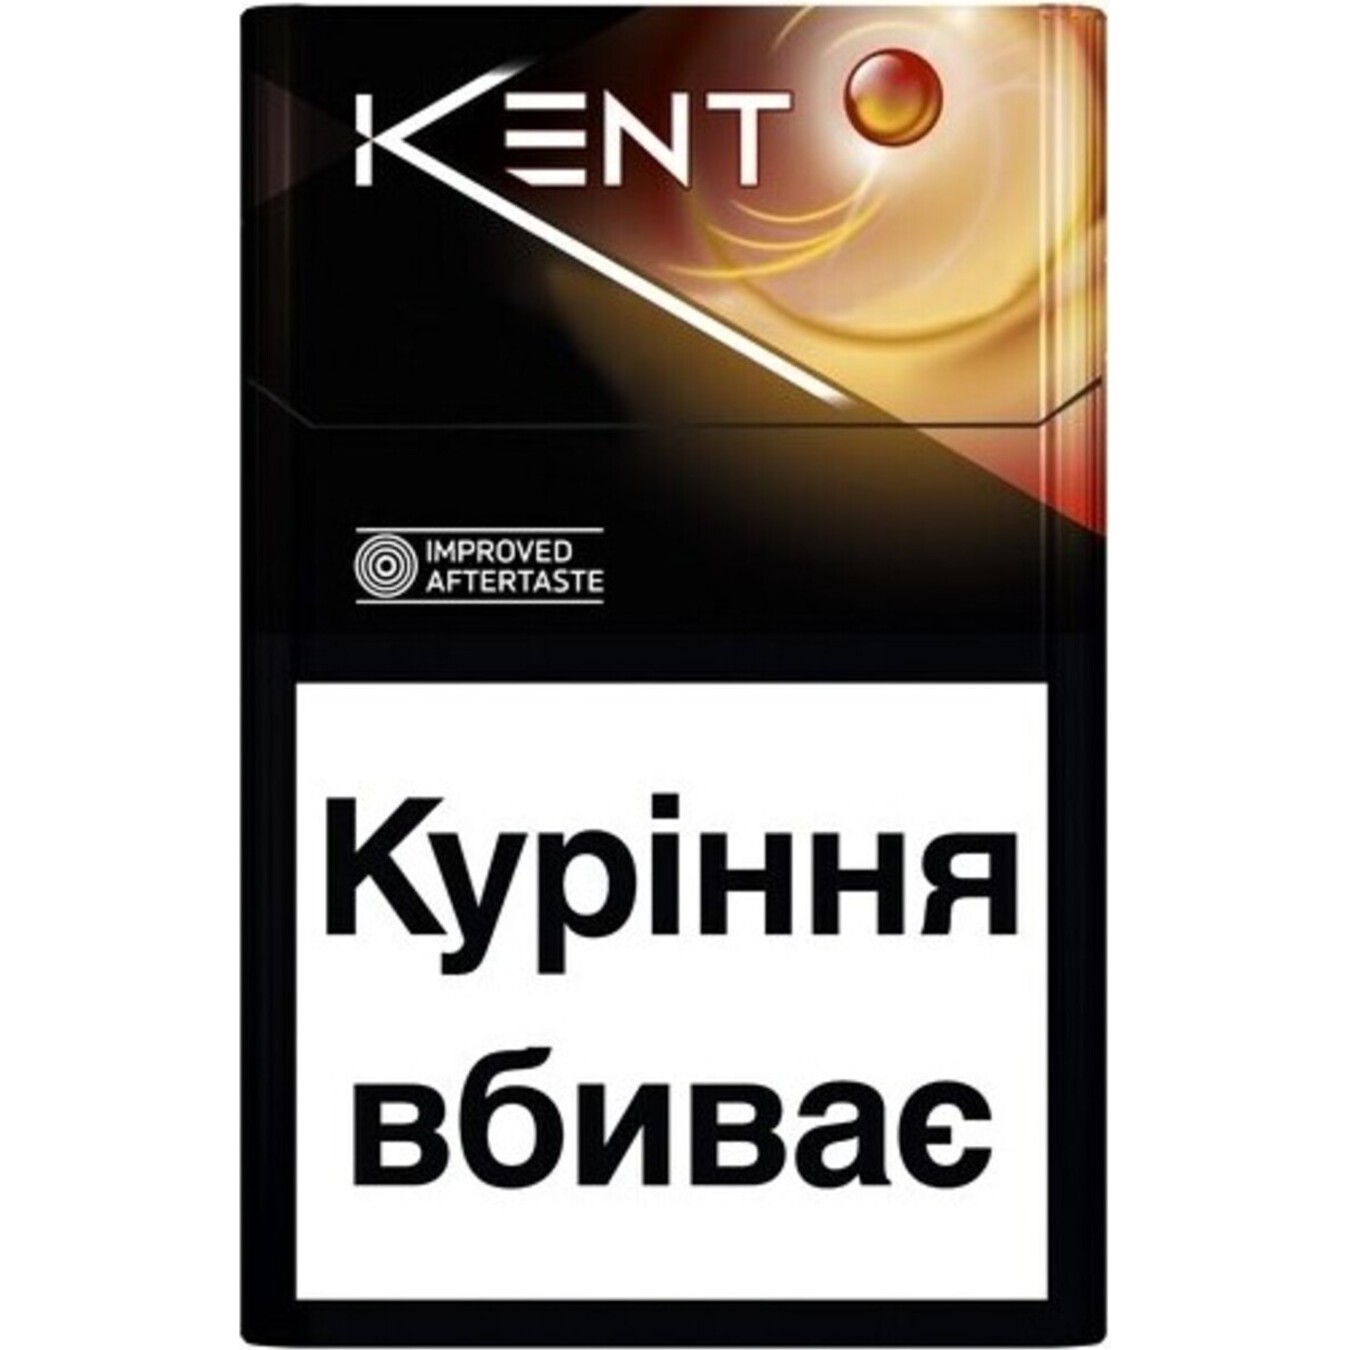 Kent Feel Velvet Cigarettes 20 pcs (the price is indicated without excise tax)